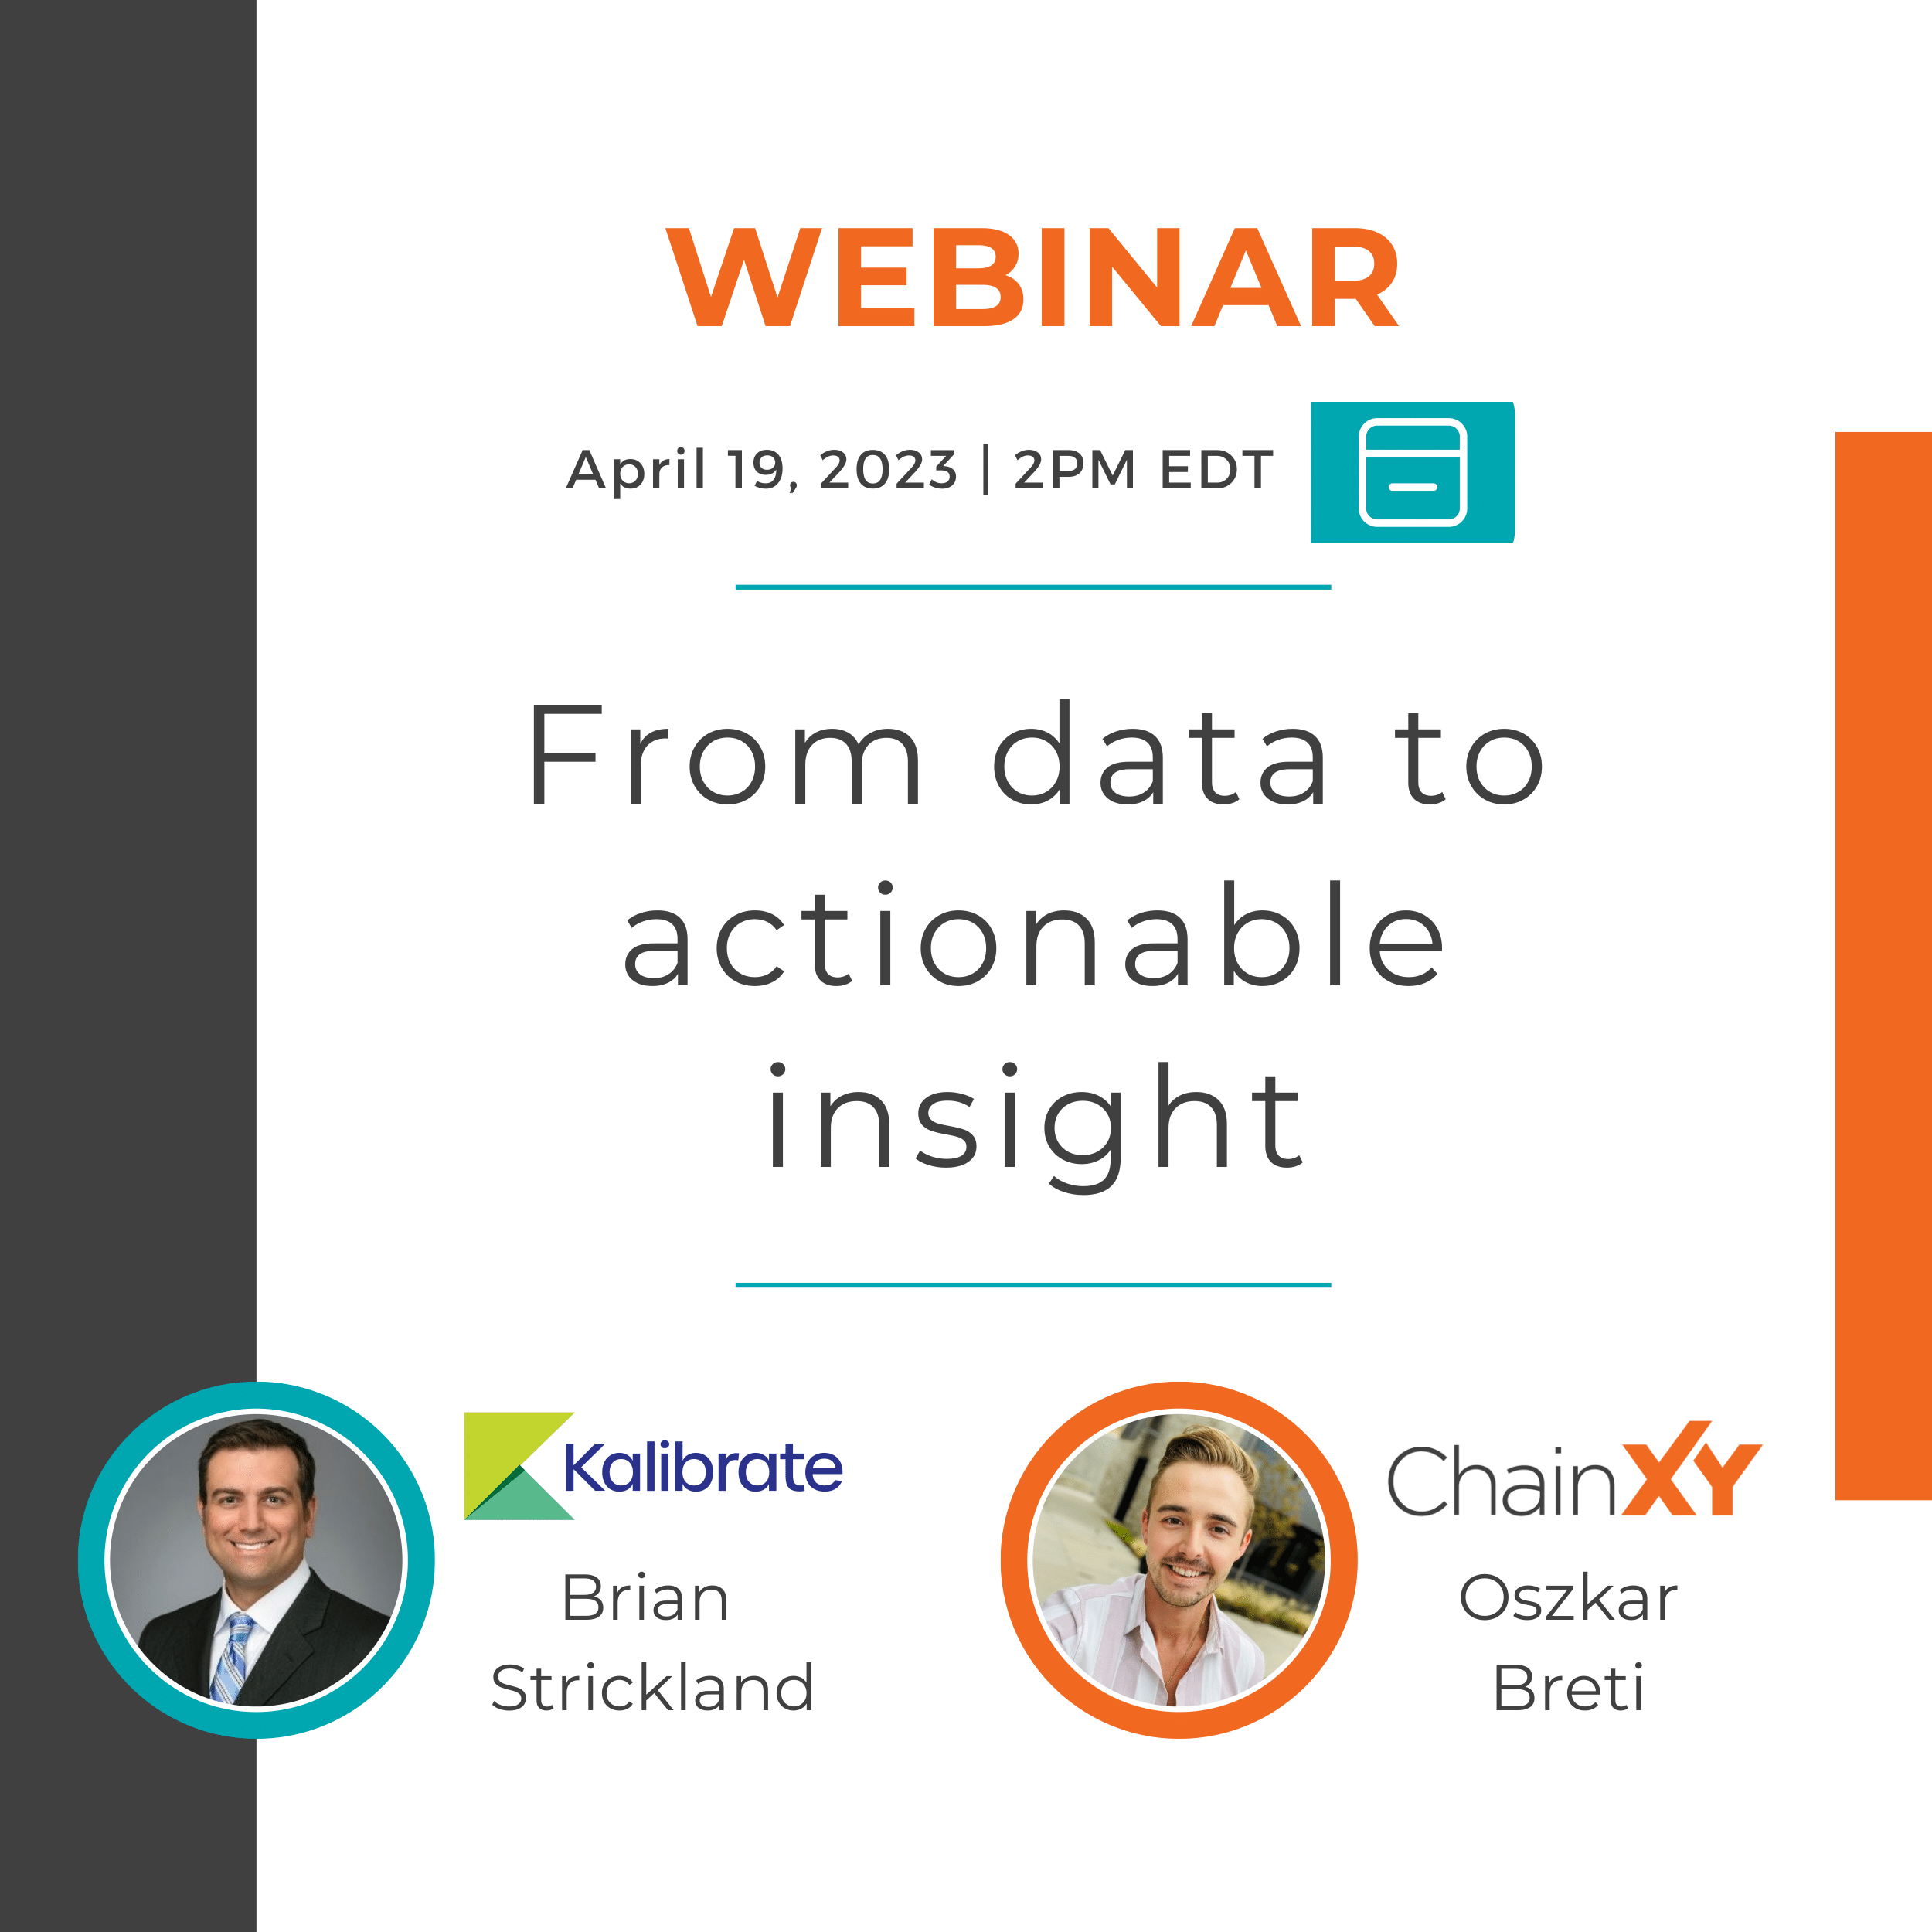 ChainXY and Kalibrate webinar on April 19, 2023: From data to actionable insight